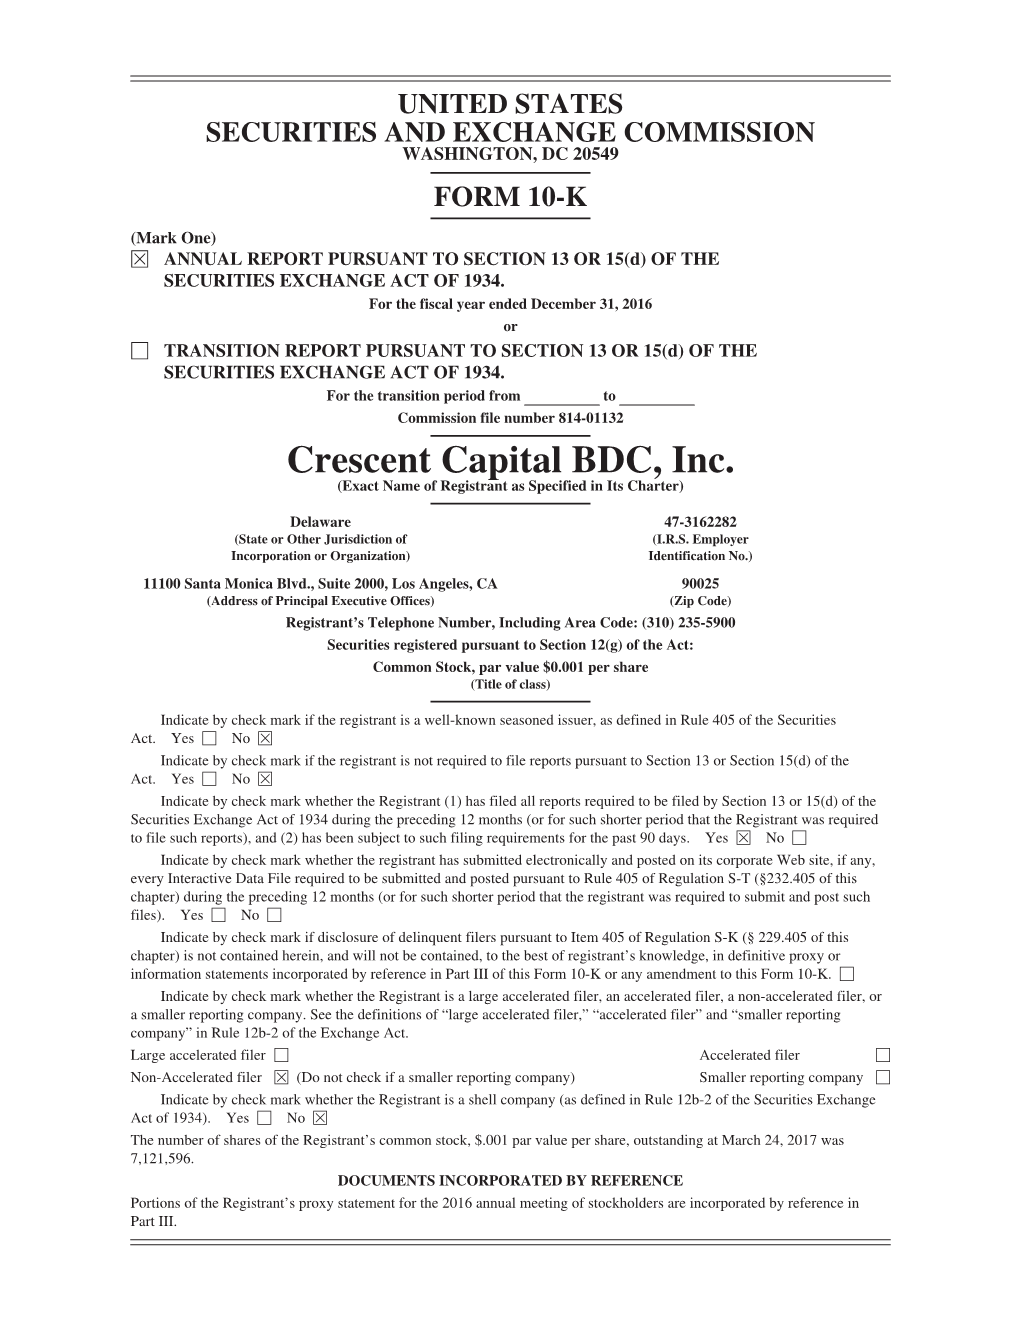 Crescent Capital BDC, Inc. (Exact Name of Registrant As Specified in Its Charter)